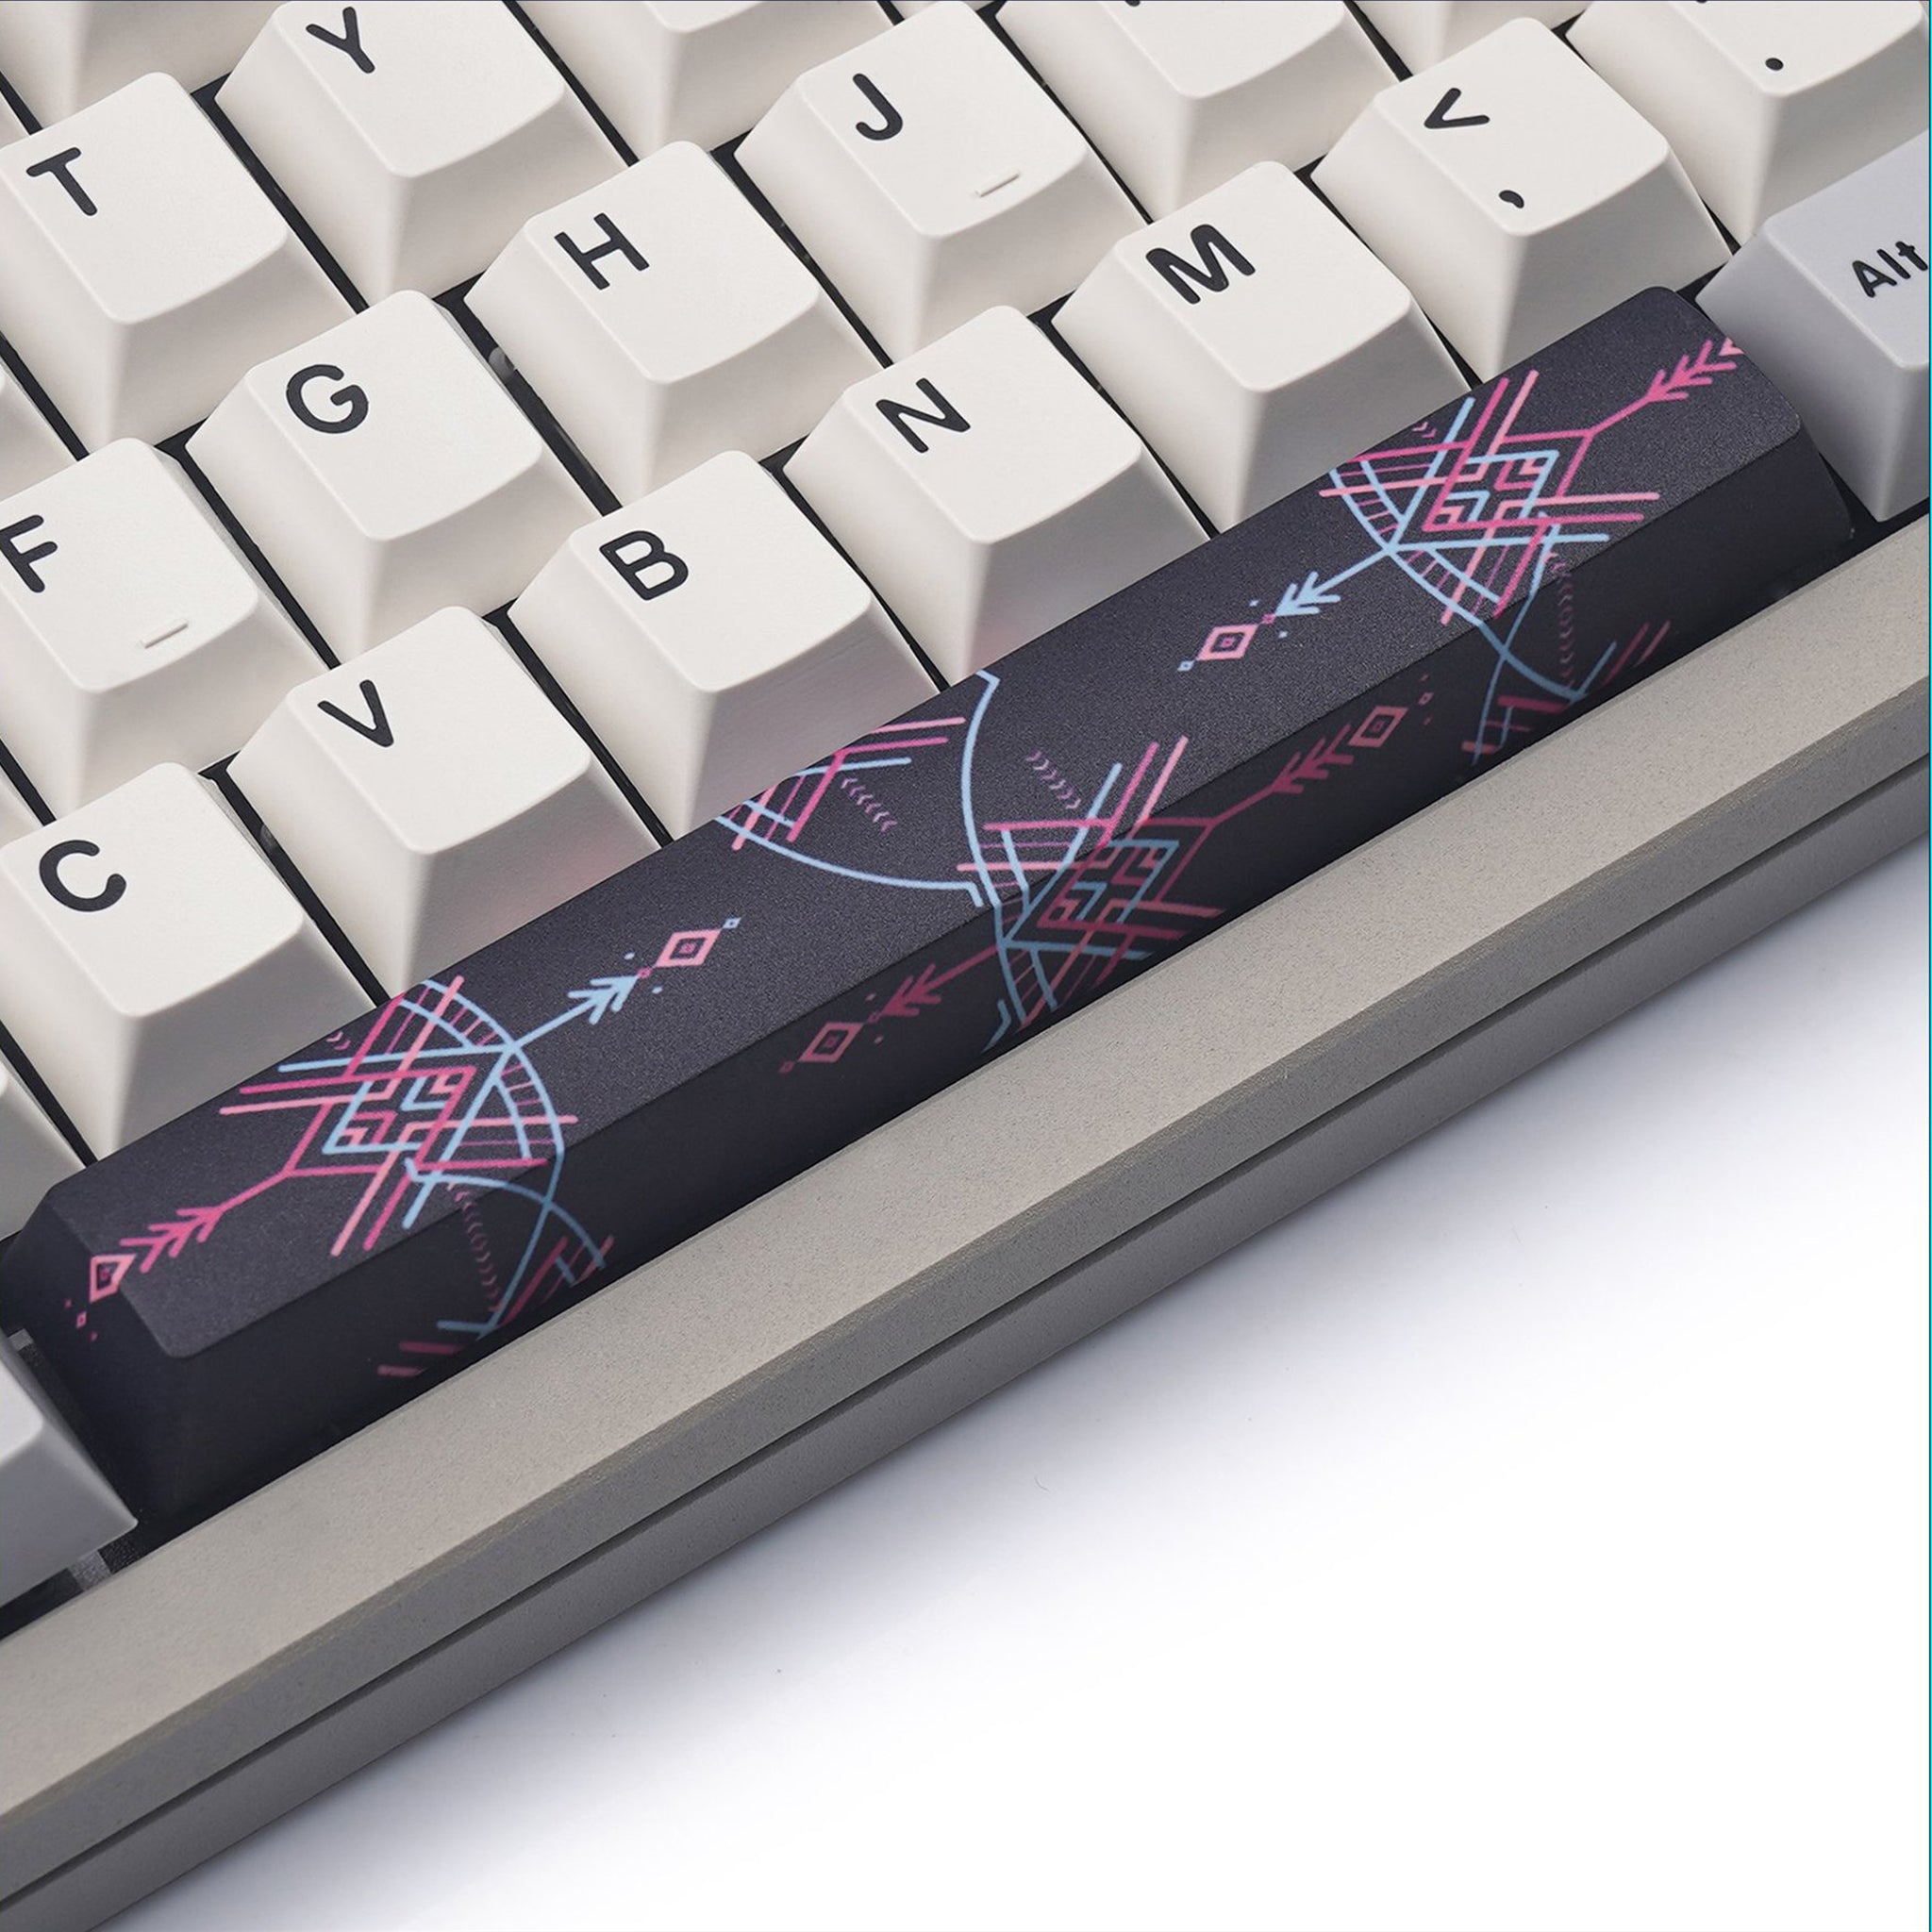 View of the Dream Catcher varient of the artisan 2.5u spacebar compatible with MX Cherry style switches for mechanical gaming and/or typist keyboards. The different varients are manufactured out of PBT material.